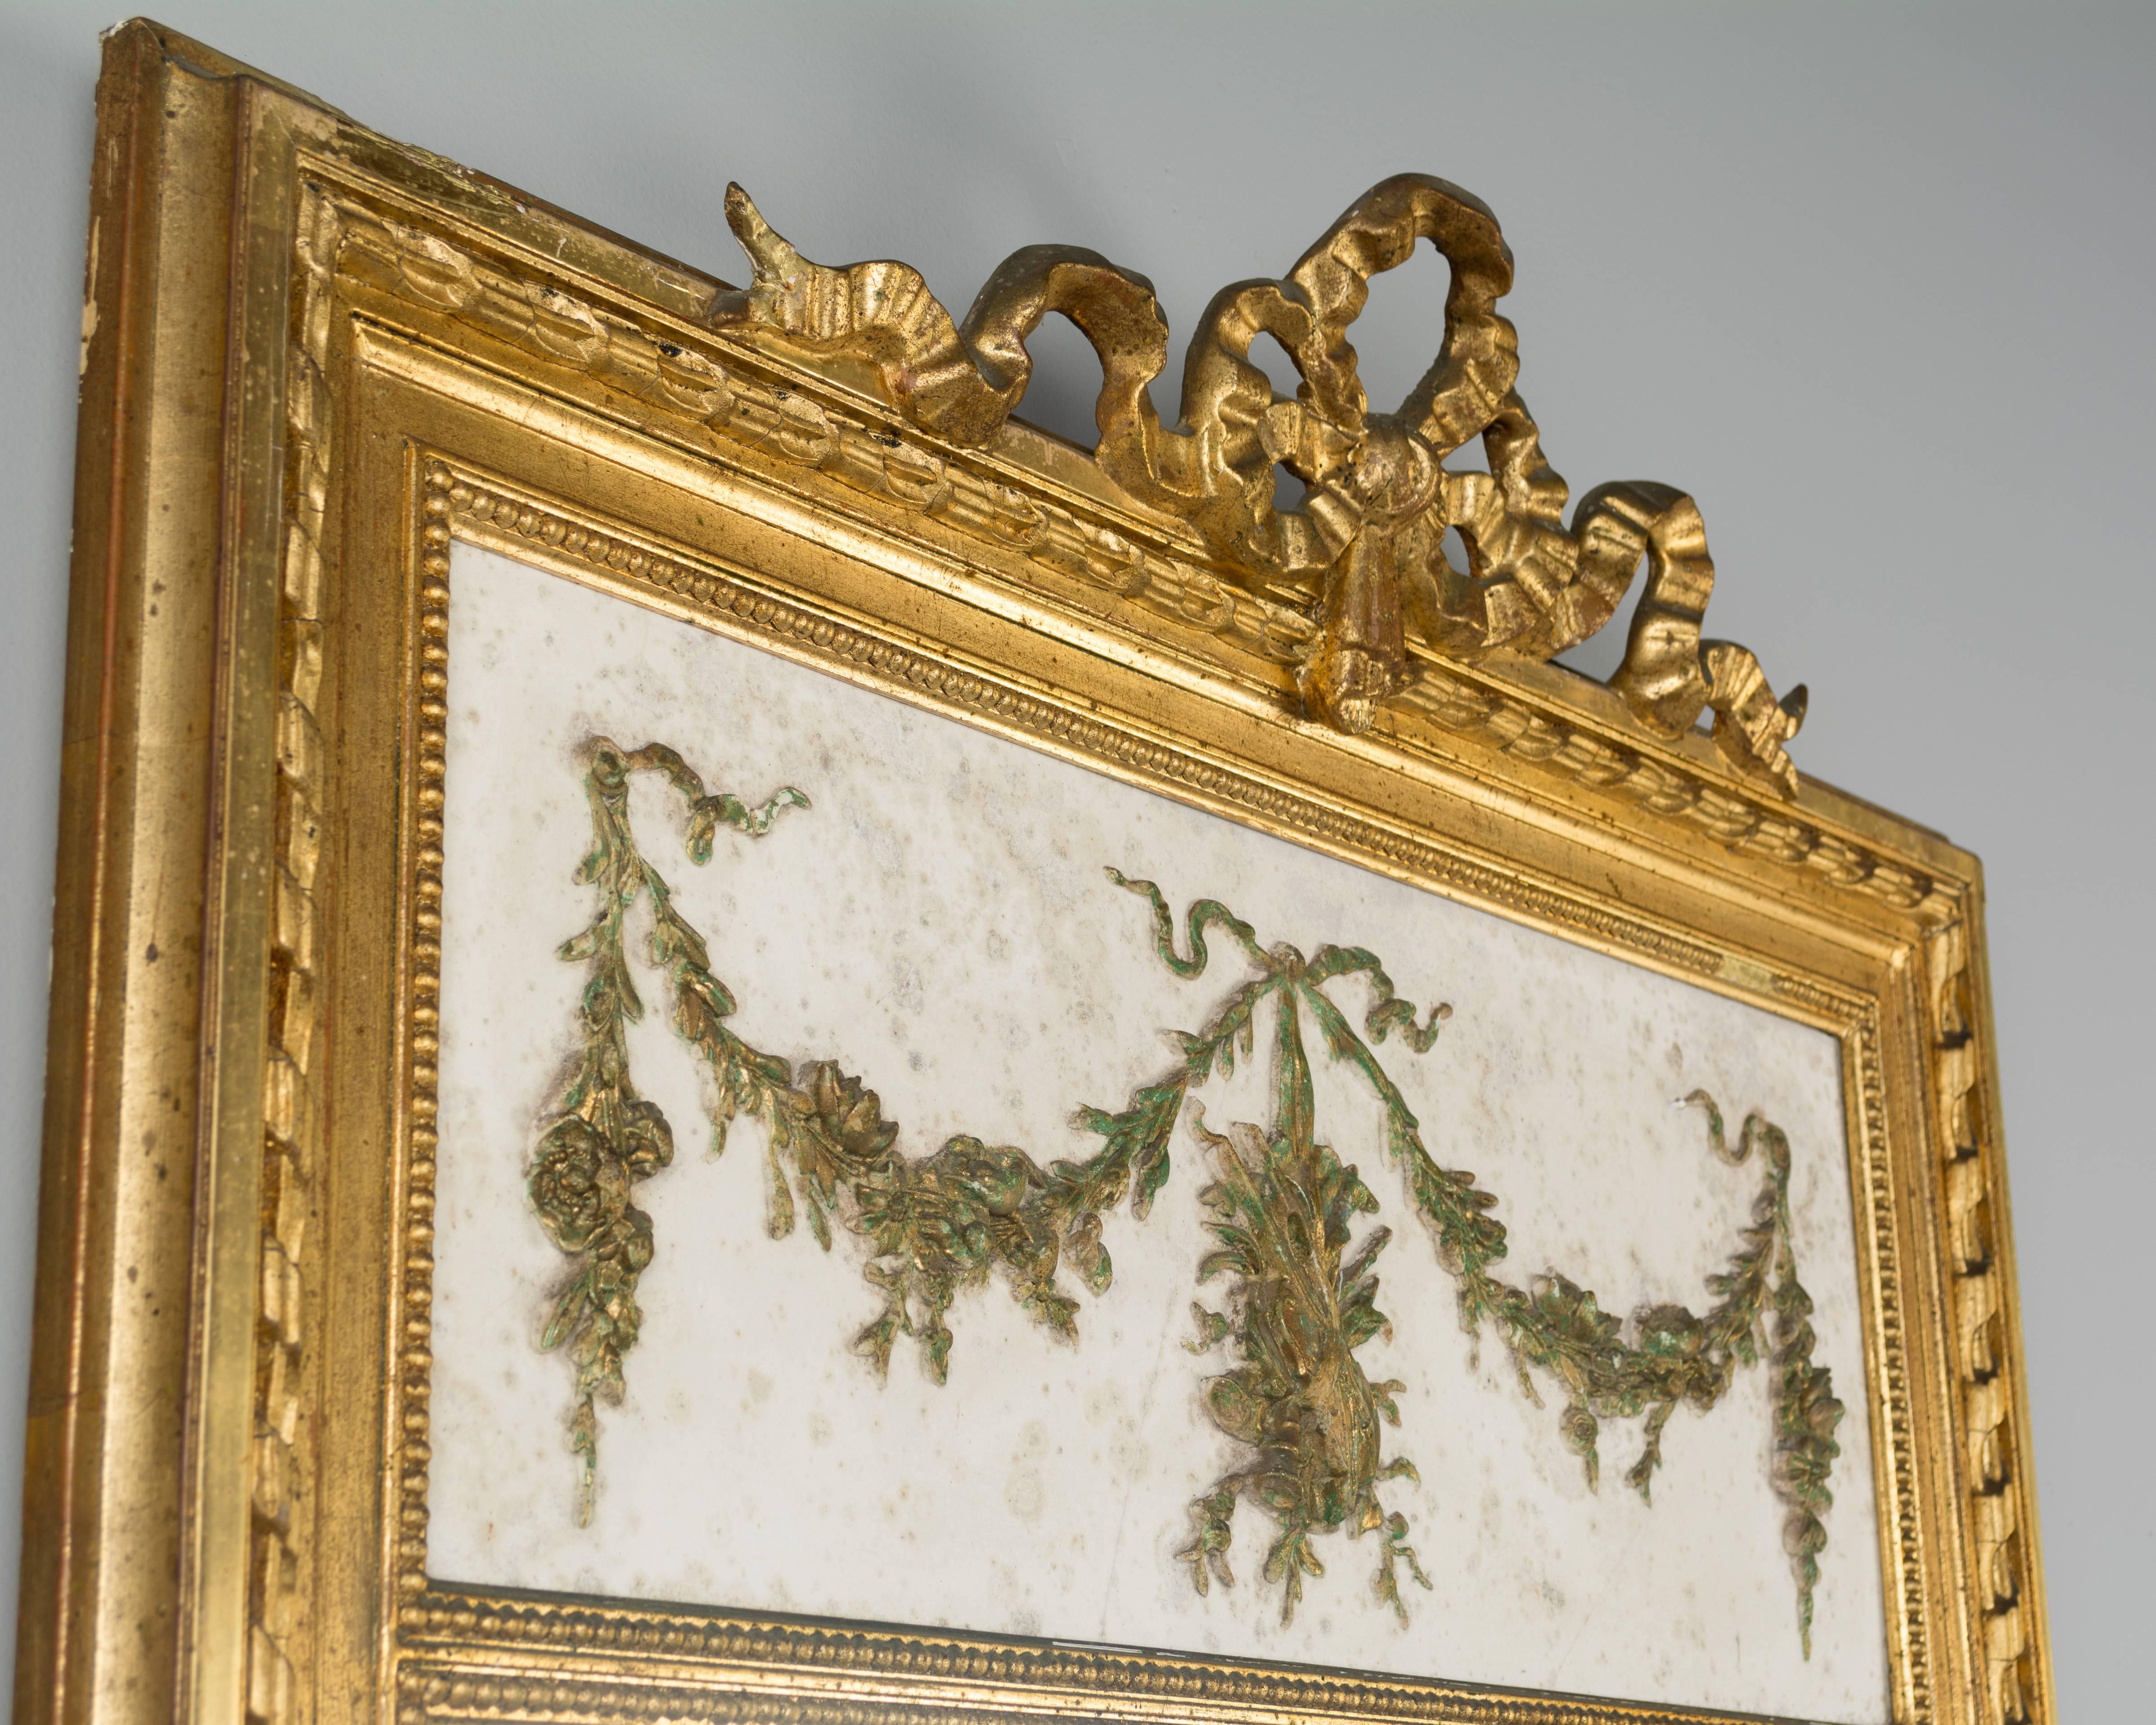 19th century Louis XVI style French gilded trumeau mirror. White marble with decorative bronze frieze in low relief depicting a floral garland with musical instruments. Gilt ribbon crown. Original beveled mirror. Nice verdigris patina to the bronze